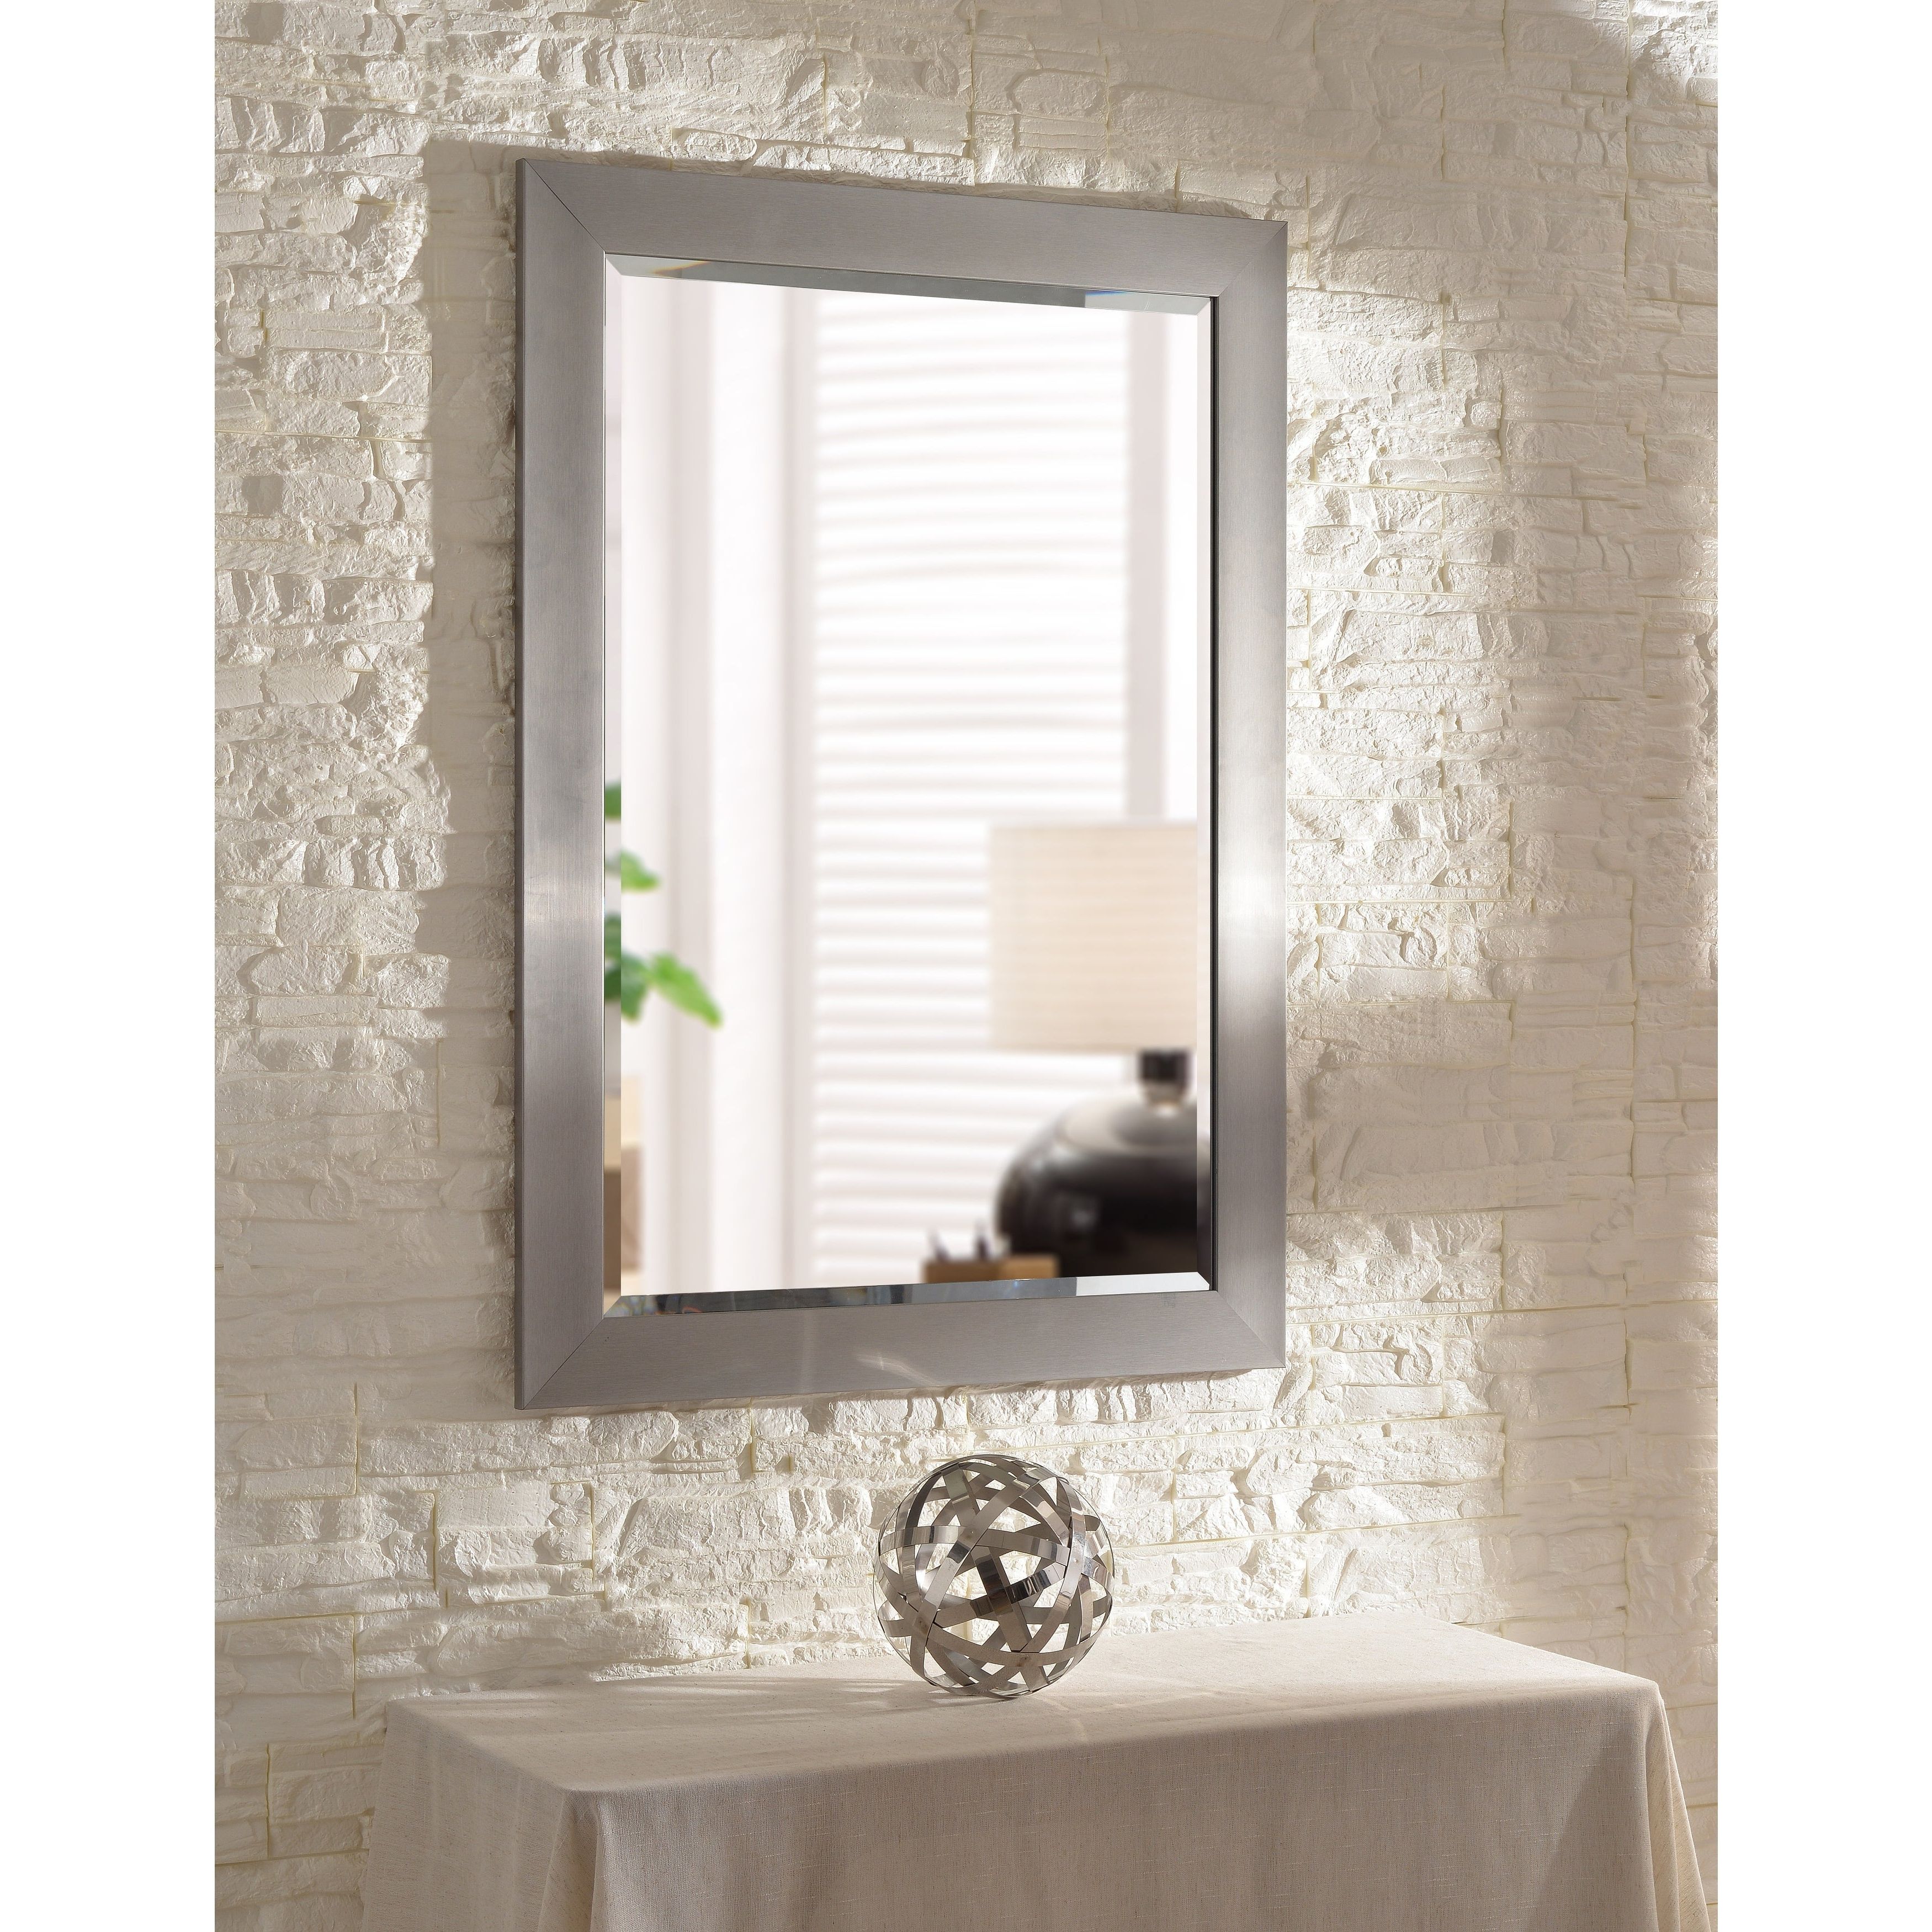 Current Asher 41 Inch Brushed Steel Wall Mirror Intended For Bathroom Wall Mirrors (View 11 of 20)